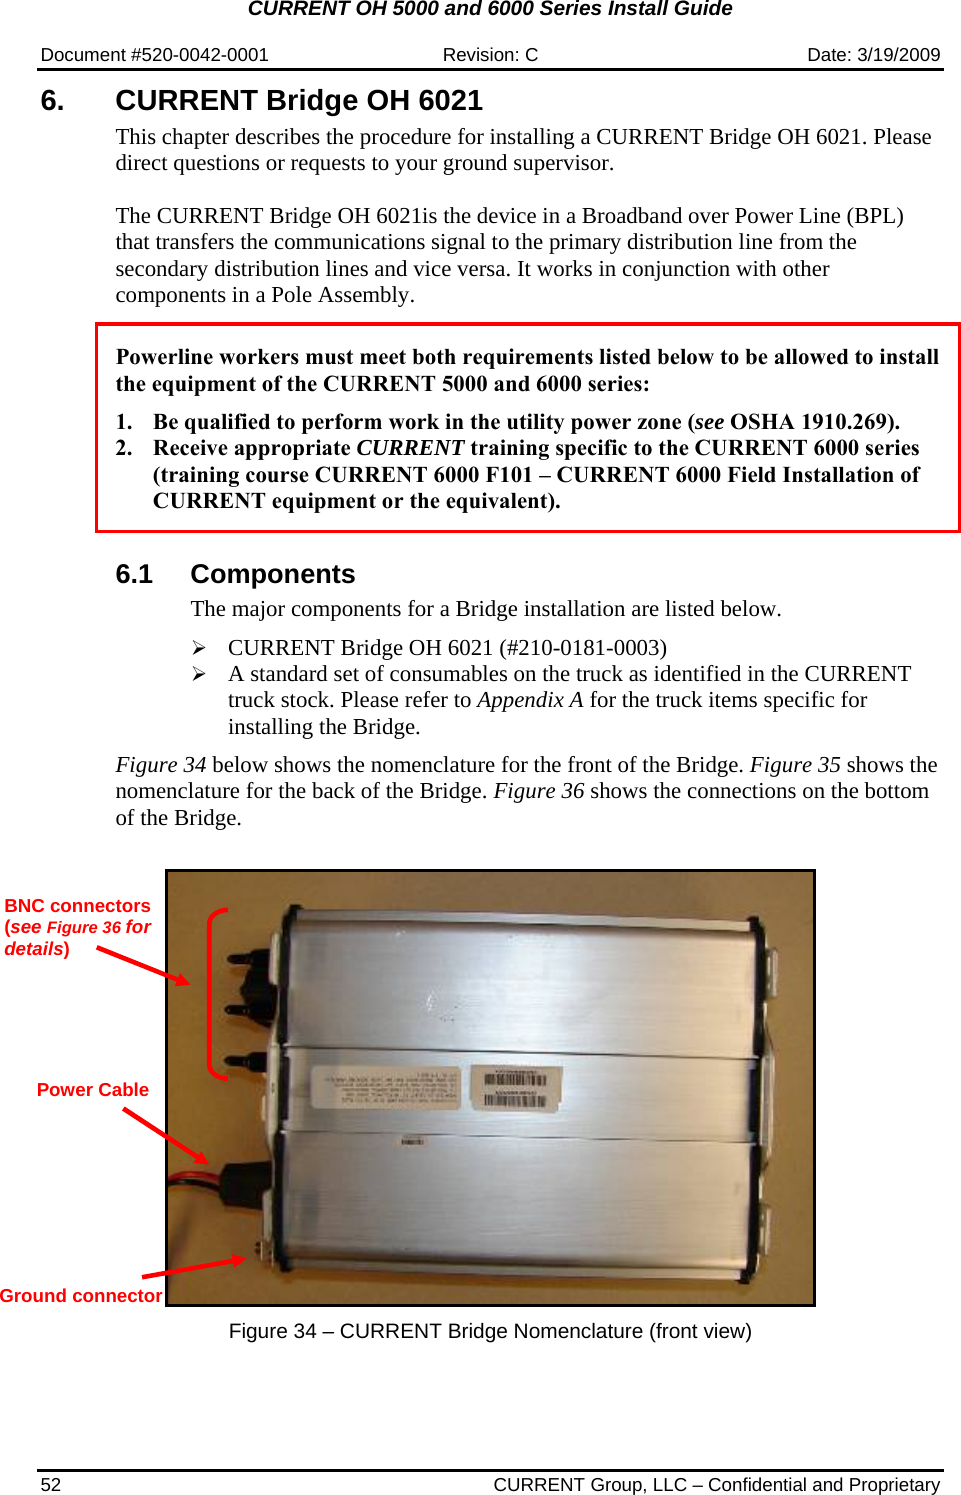 CURRENT OH 5000 and 6000 Series Install Guide  Document #520-0042-0001  Revision: C  Date: 3/19/2009 52  CURRENT Group, LLC – Confidential and Proprietary 6. CURRENT Bridge OH 6021  This chapter describes the procedure for installing a CURRENT Bridge OH 6021. Please direct questions or requests to your ground supervisor.  The CURRENT Bridge OH 6021is the device in a Broadband over Power Line (BPL) that transfers the communications signal to the primary distribution line from the secondary distribution lines and vice versa. It works in conjunction with other components in a Pole Assembly.    Powerline workers must meet both requirements listed below to be allowed to install the equipment of the CURRENT 5000 and 6000 series:  1. Be qualified to perform work in the utility power zone (see OSHA 1910.269). 2. Receive appropriate CURRENT training specific to the CURRENT 6000 series (training course CURRENT 6000 F101 – CURRENT 6000 Field Installation of CURRENT equipment or the equivalent).   6.1 Components The major components for a Bridge installation are listed below.  ¾ CURRENT Bridge OH 6021 (#210-0181-0003) ¾ A standard set of consumables on the truck as identified in the CURRENT truck stock. Please refer to Appendix A for the truck items specific for installing the Bridge.   Figure 34 below shows the nomenclature for the front of the Bridge. Figure 35 shows the nomenclature for the back of the Bridge. Figure 36 shows the connections on the bottom of the Bridge.     Figure 34 – CURRENT Bridge Nomenclature (front view) BNC connectors (see Figure 36 for details)  Power Cable Ground connector 